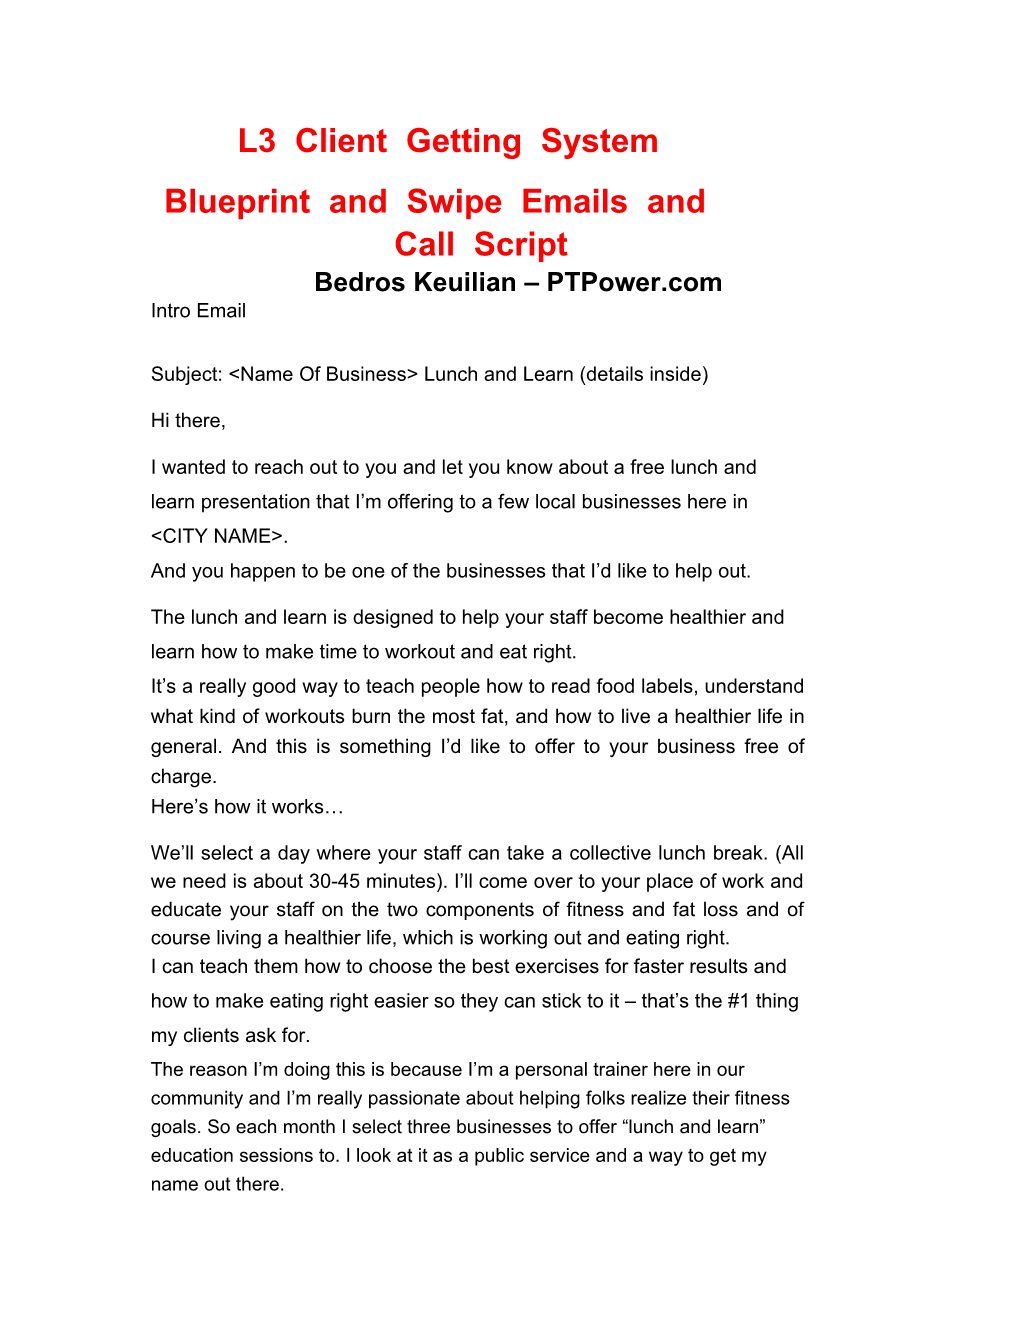 Blueprint and Swipe Emails And